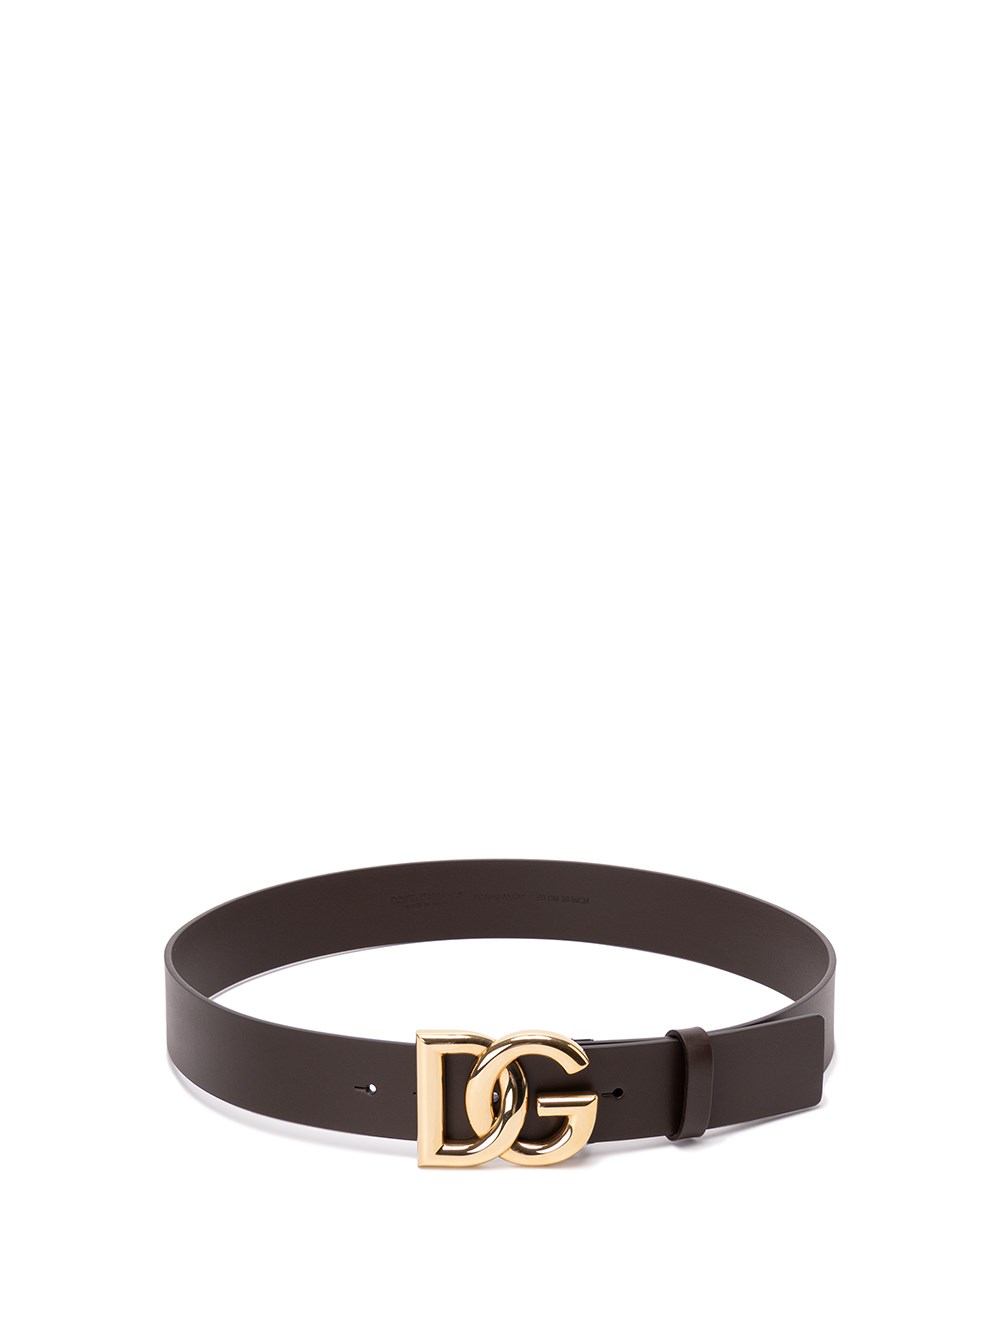 Dolce & Gabbana Lux Leather Belt With Crossed Dg Logo In Brown